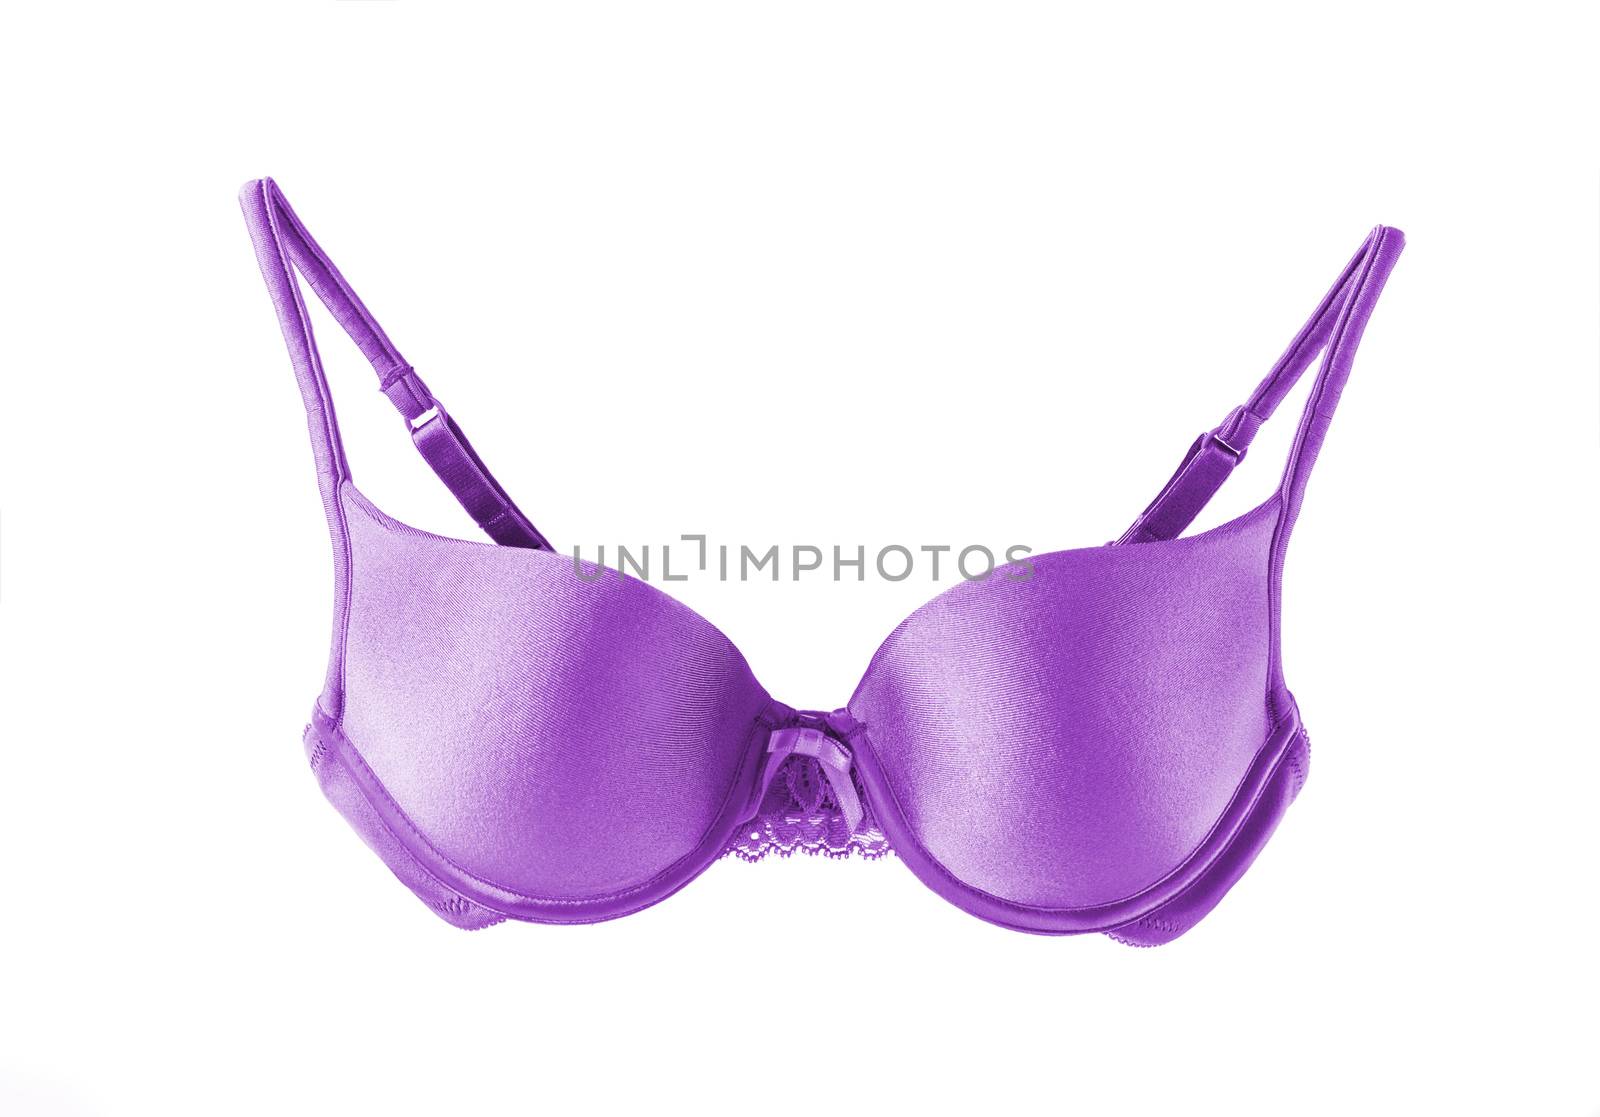 Violet bra isolated on a white background by ozaiachin